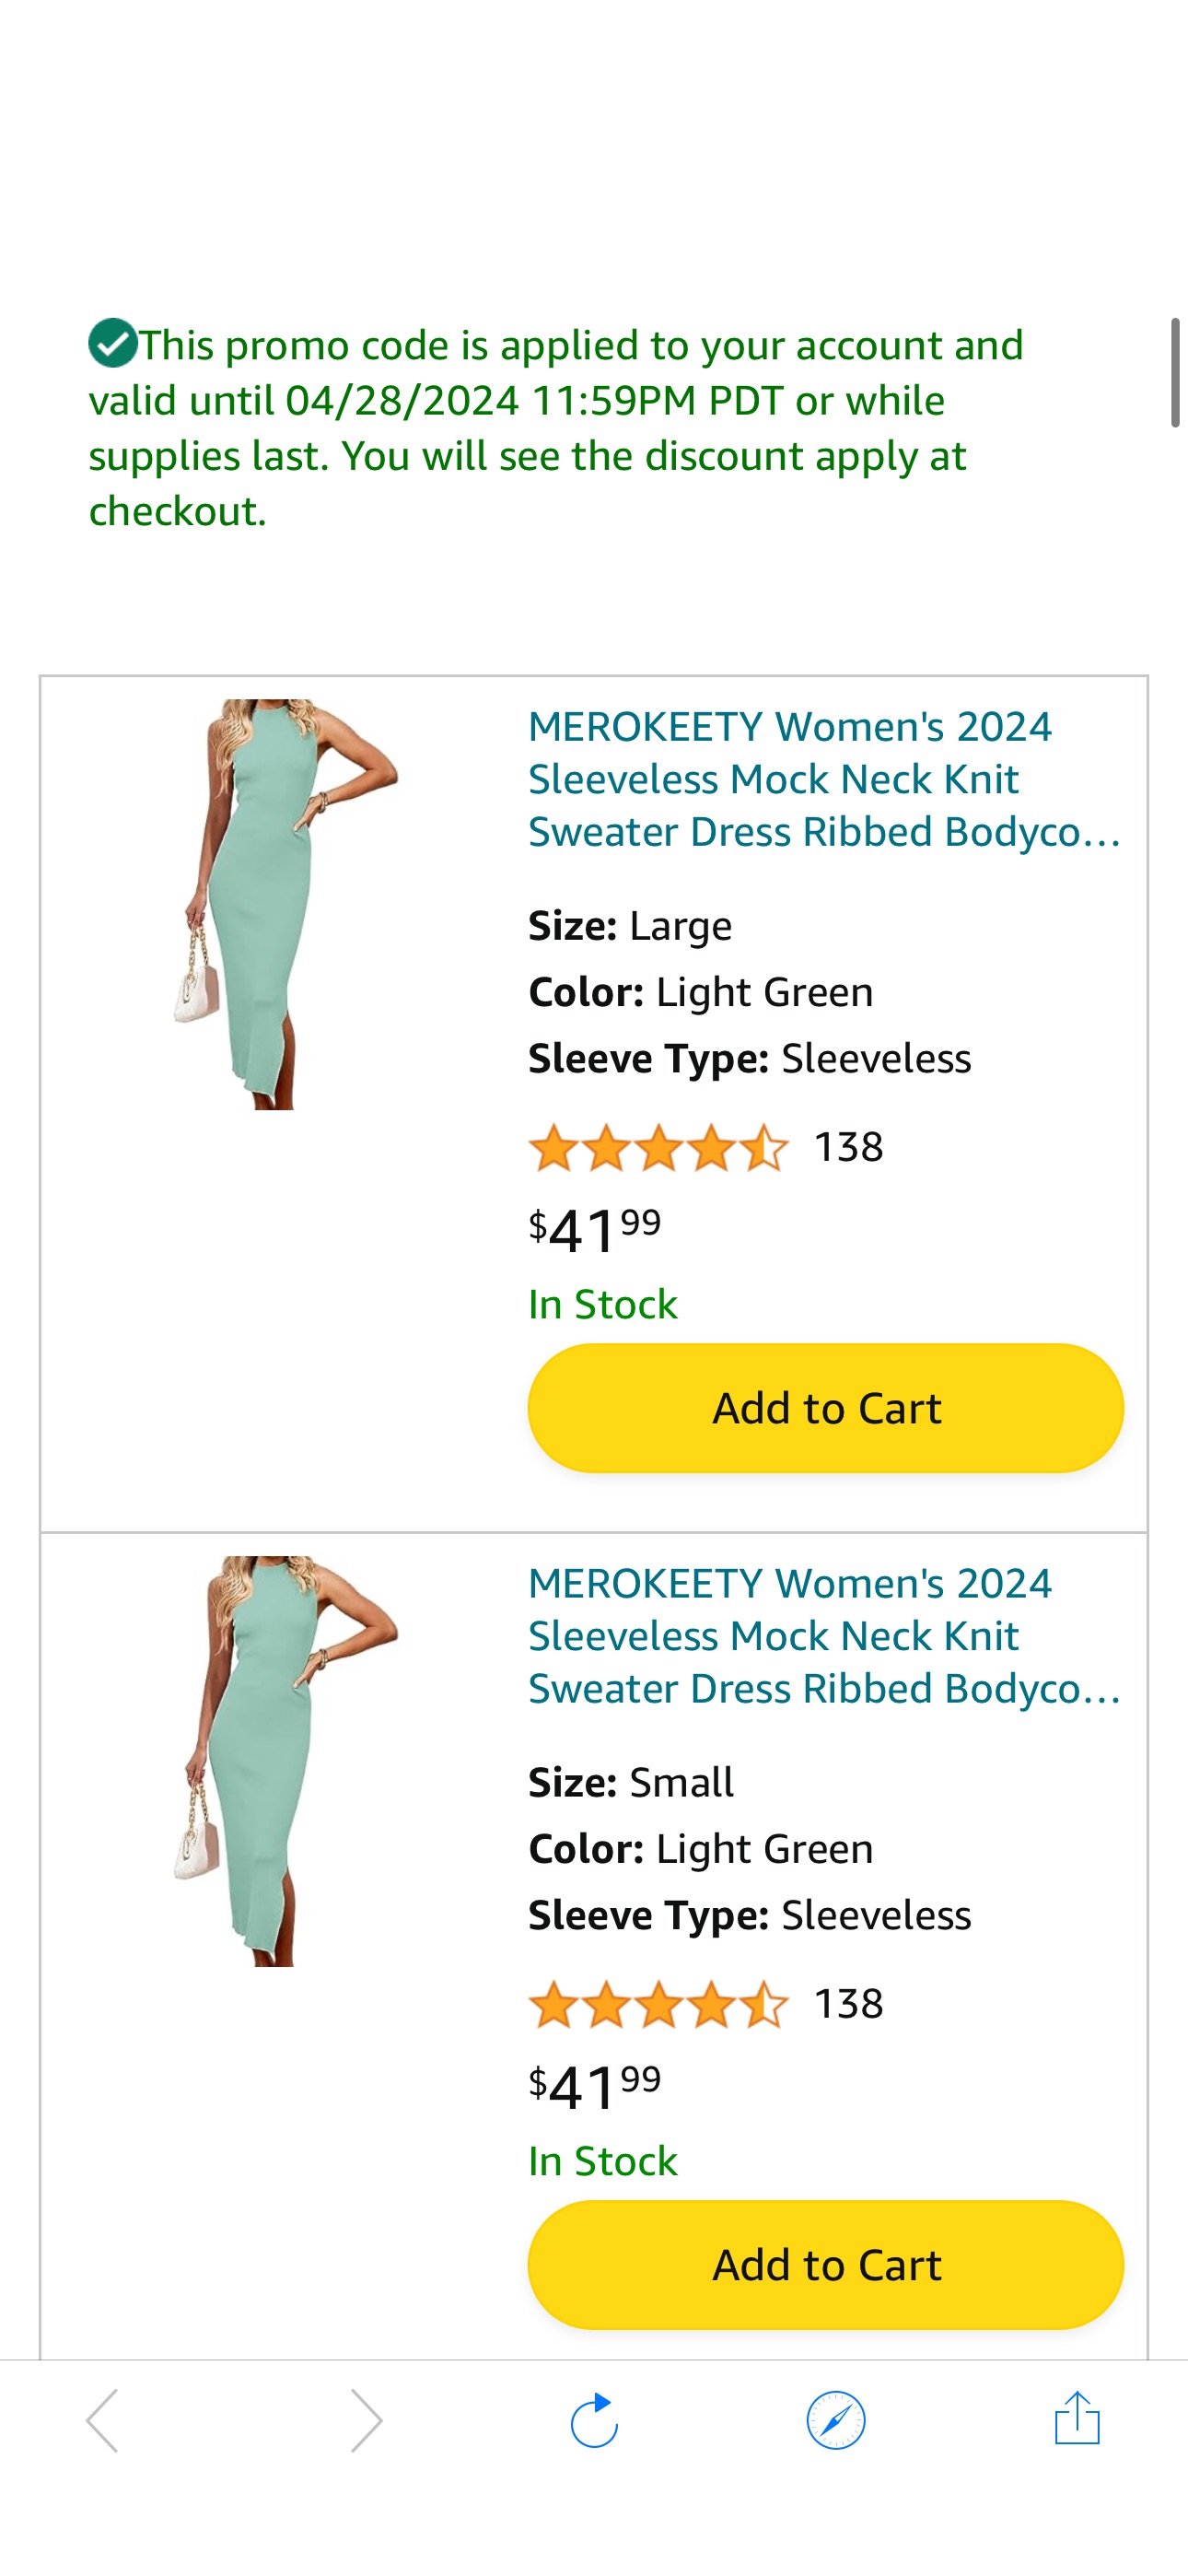 Save 50% with promo code 506RDX5Z | Amazon.com MEROKEETY Sleeveless Mock Neck Knit Sweater Dress ONLY $16.79 on Amazon (Reg. $42) Clip the 10% Off coupon + Use code 506RDX5Z